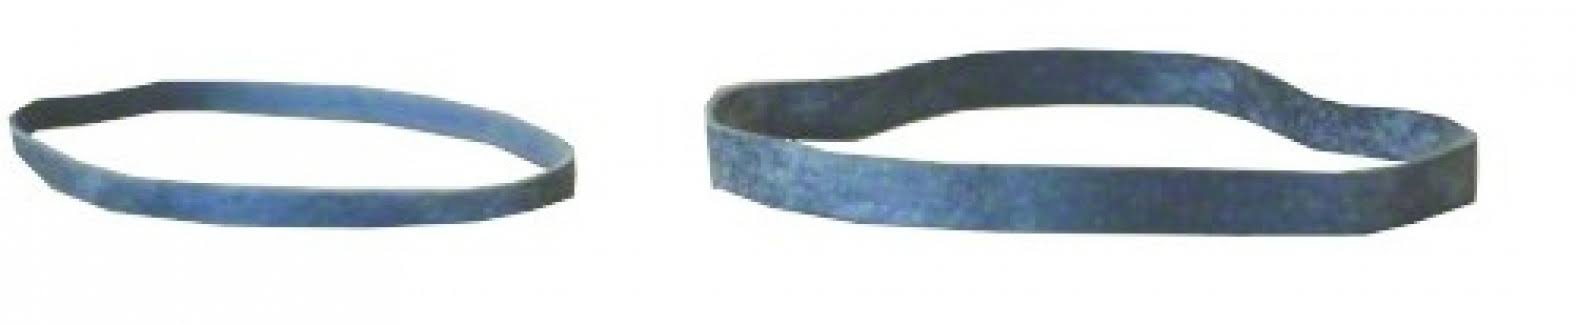 Blue Water Candy Rubber Bands 97014